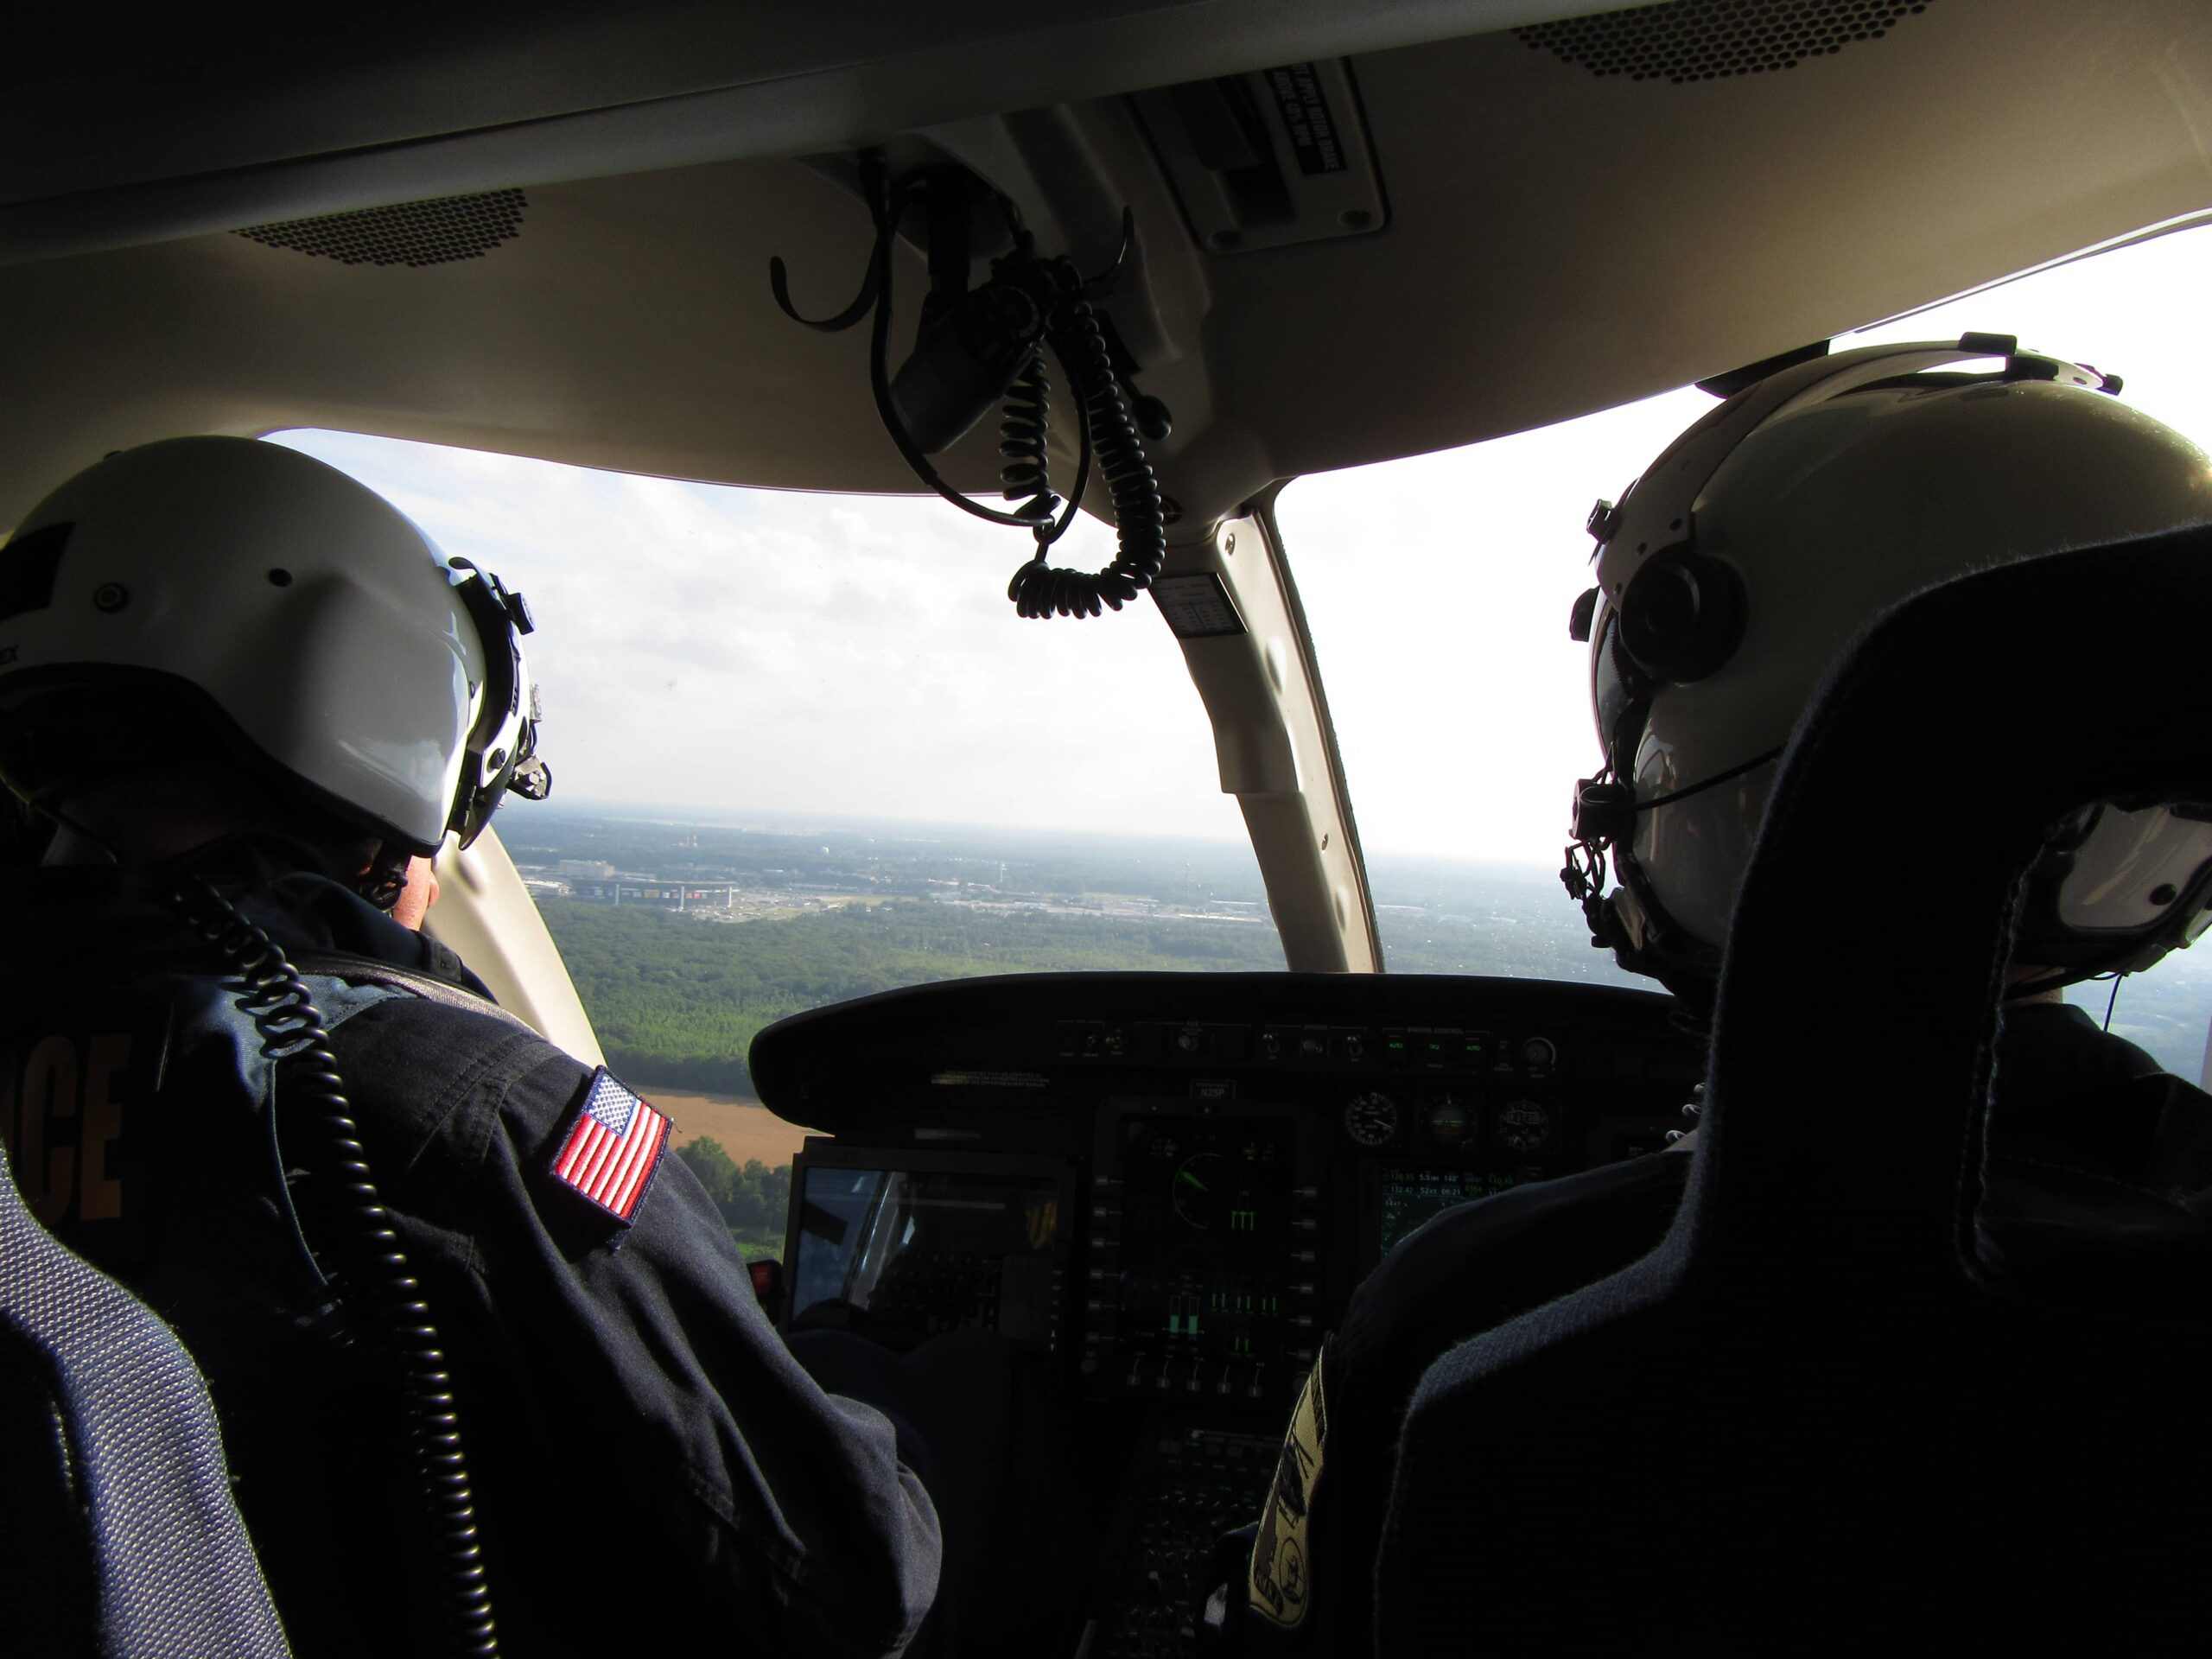 Two pilots flying helicopter in Delaware, USA. Photo taken by ADRIDEN Global Inc.